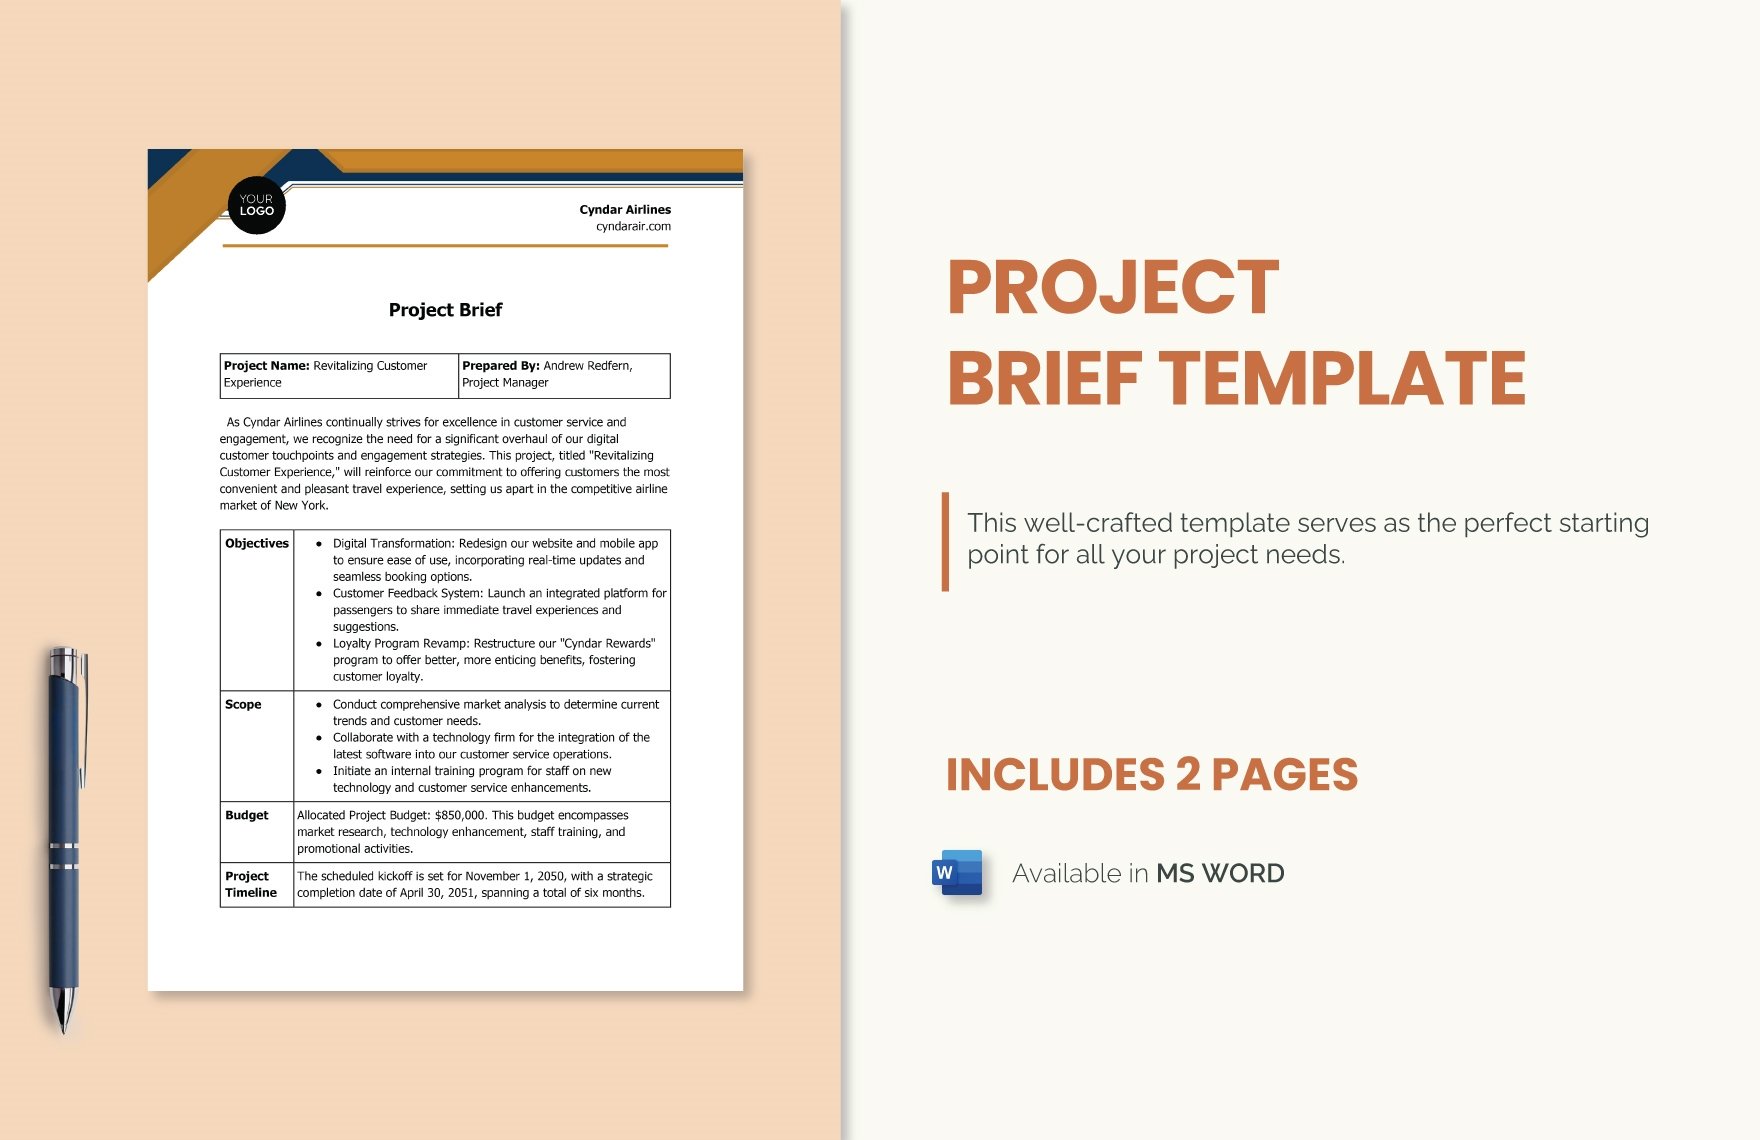 Project Brief Template in Word